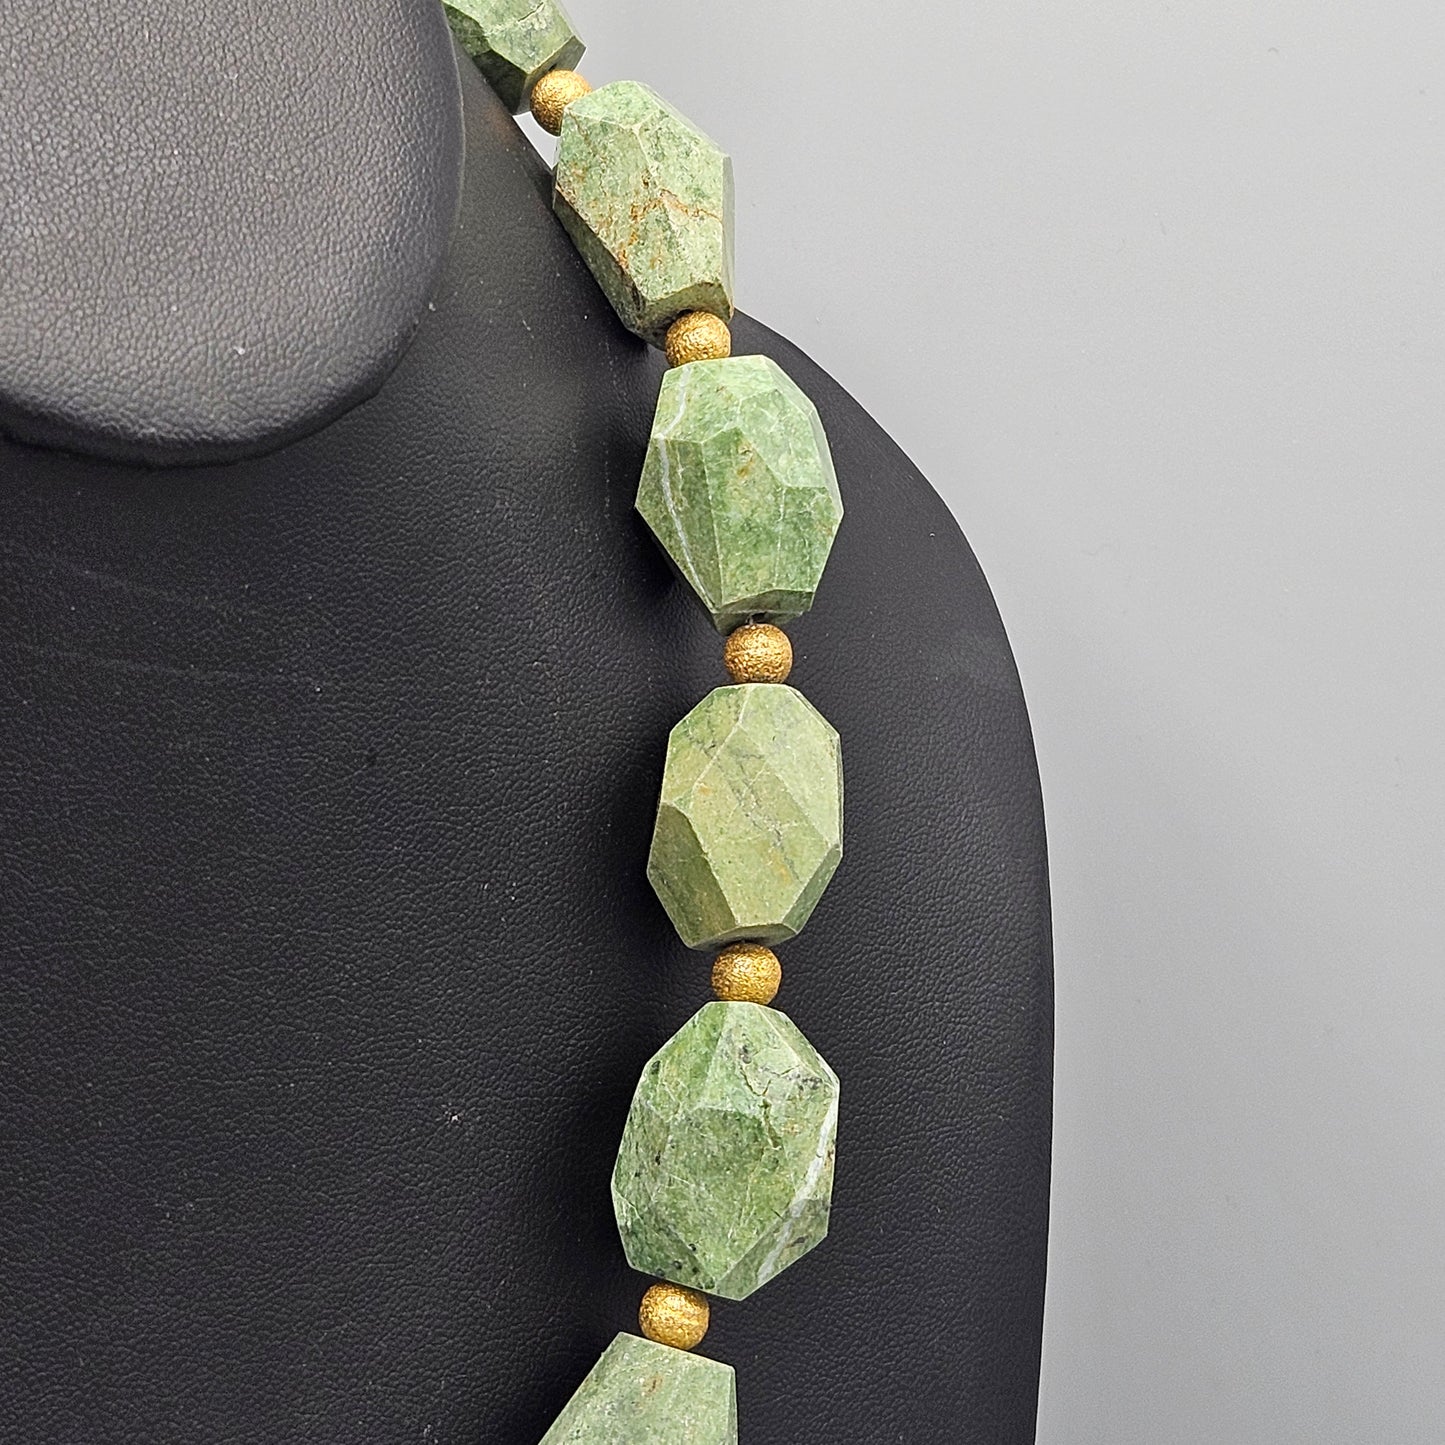 Chunky Green Stone Necklace